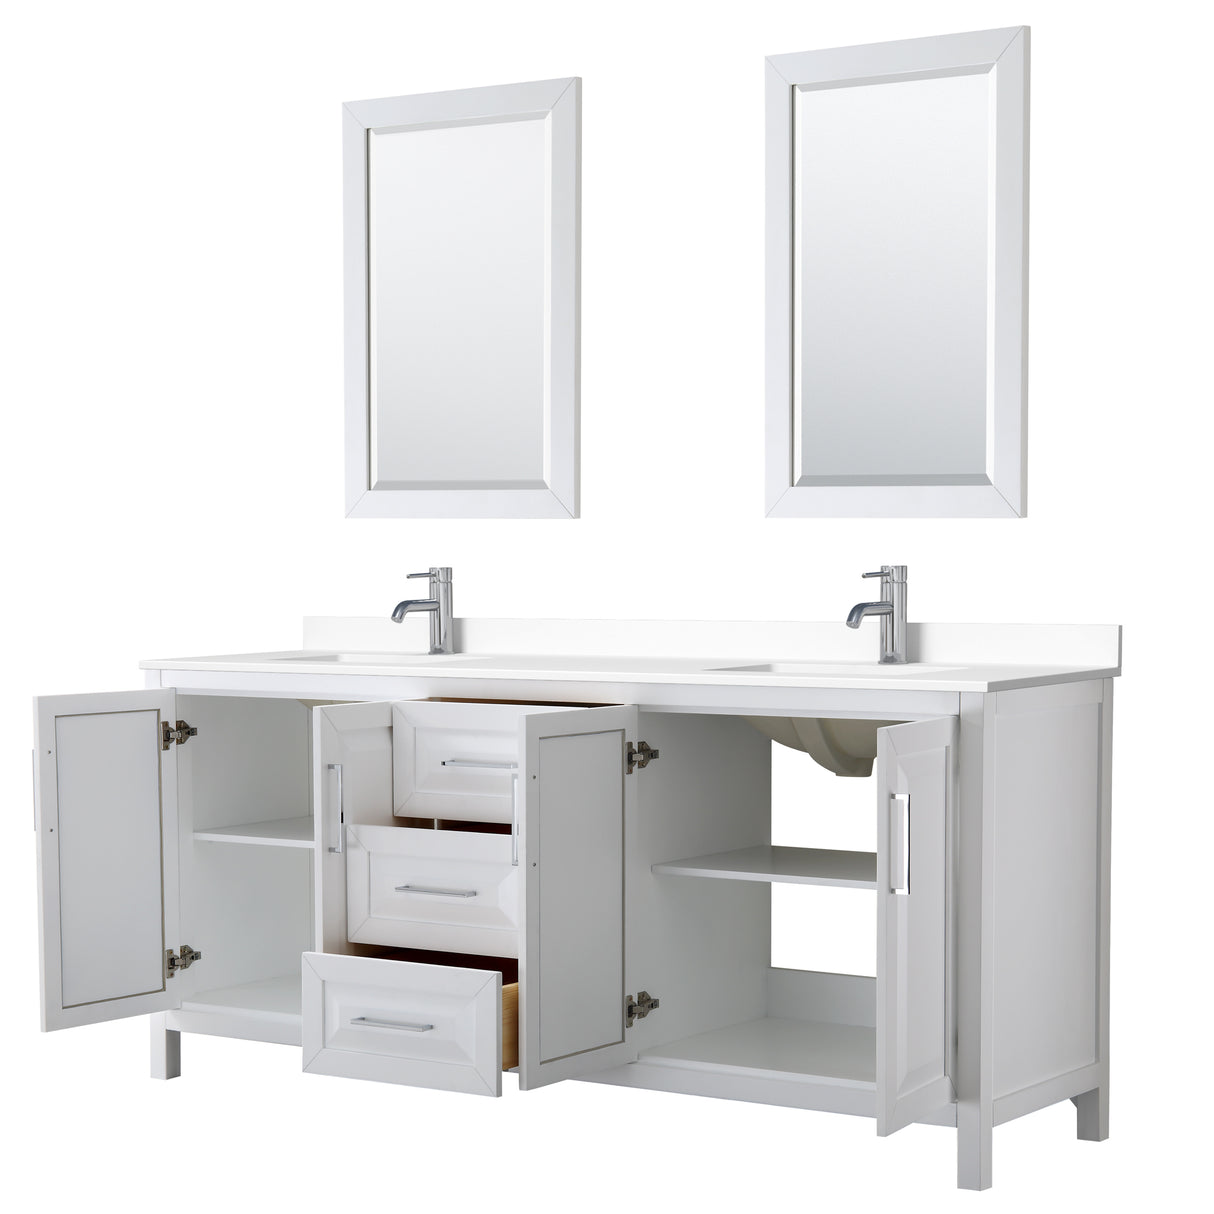 Daria 80 Inch Double Bathroom Vanity in White White Cultured Marble Countertop Undermount Square Sinks 24 Inch Mirrors